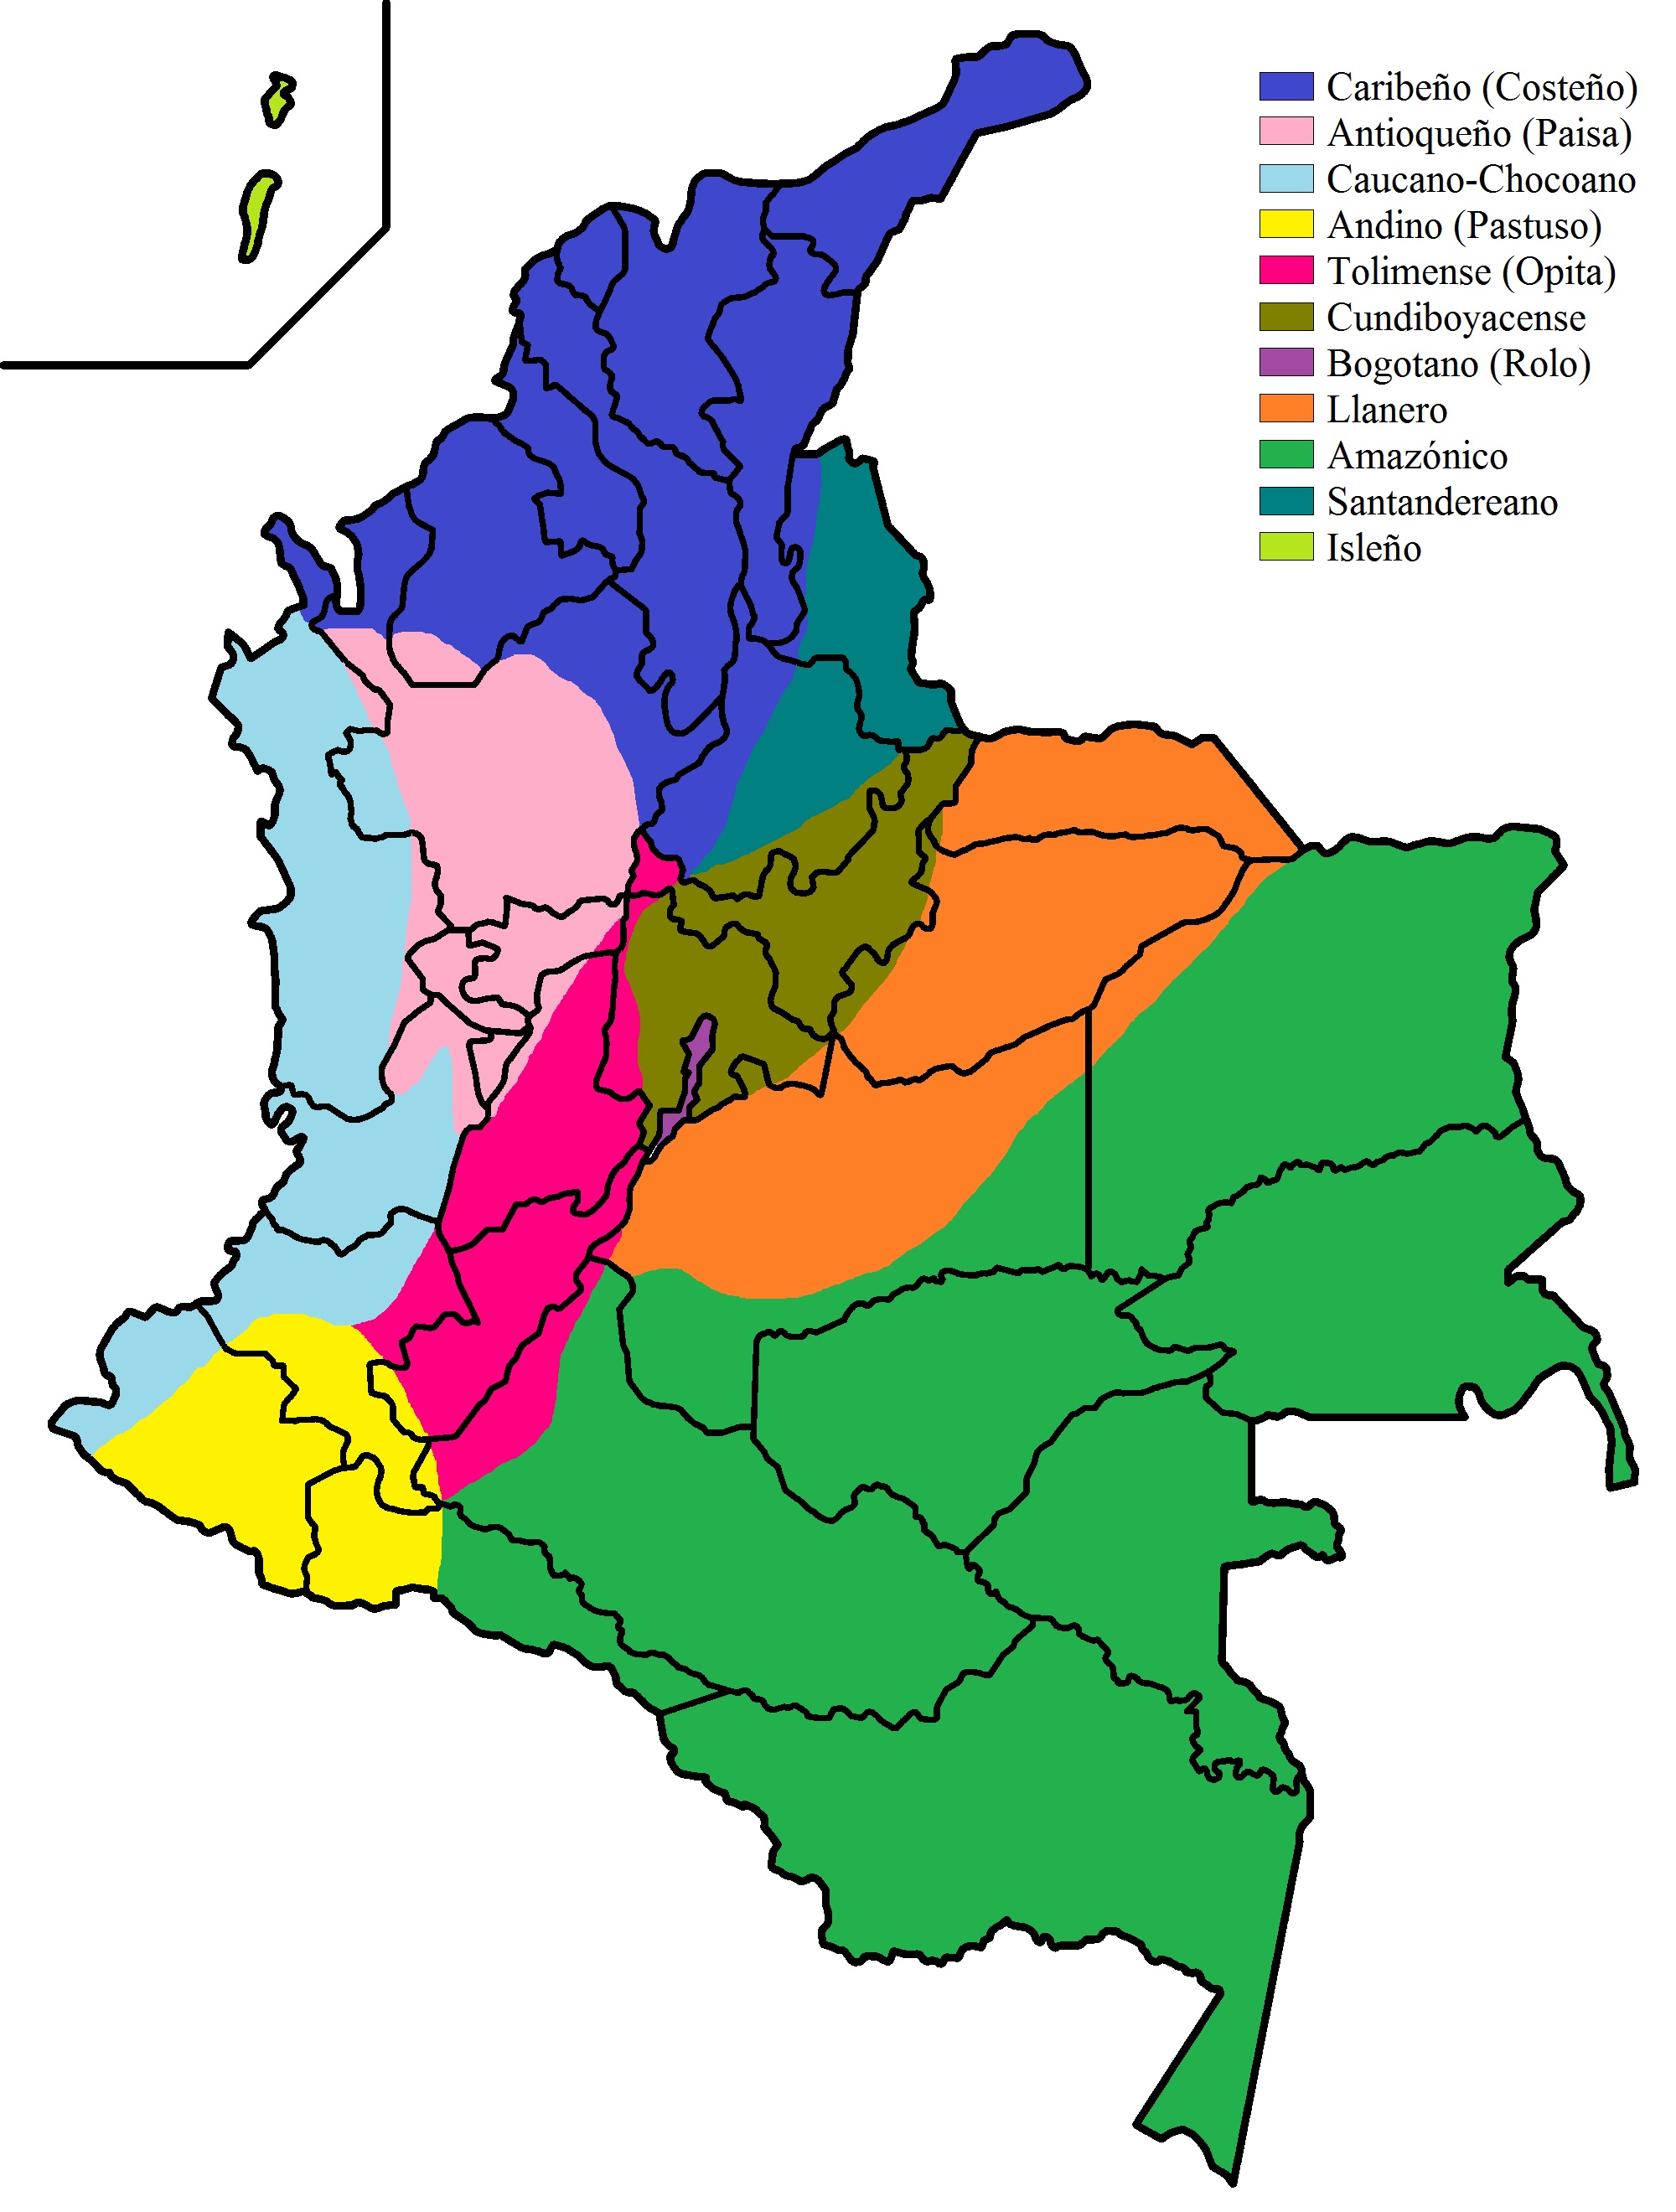 Understanding Colombia’s different accents